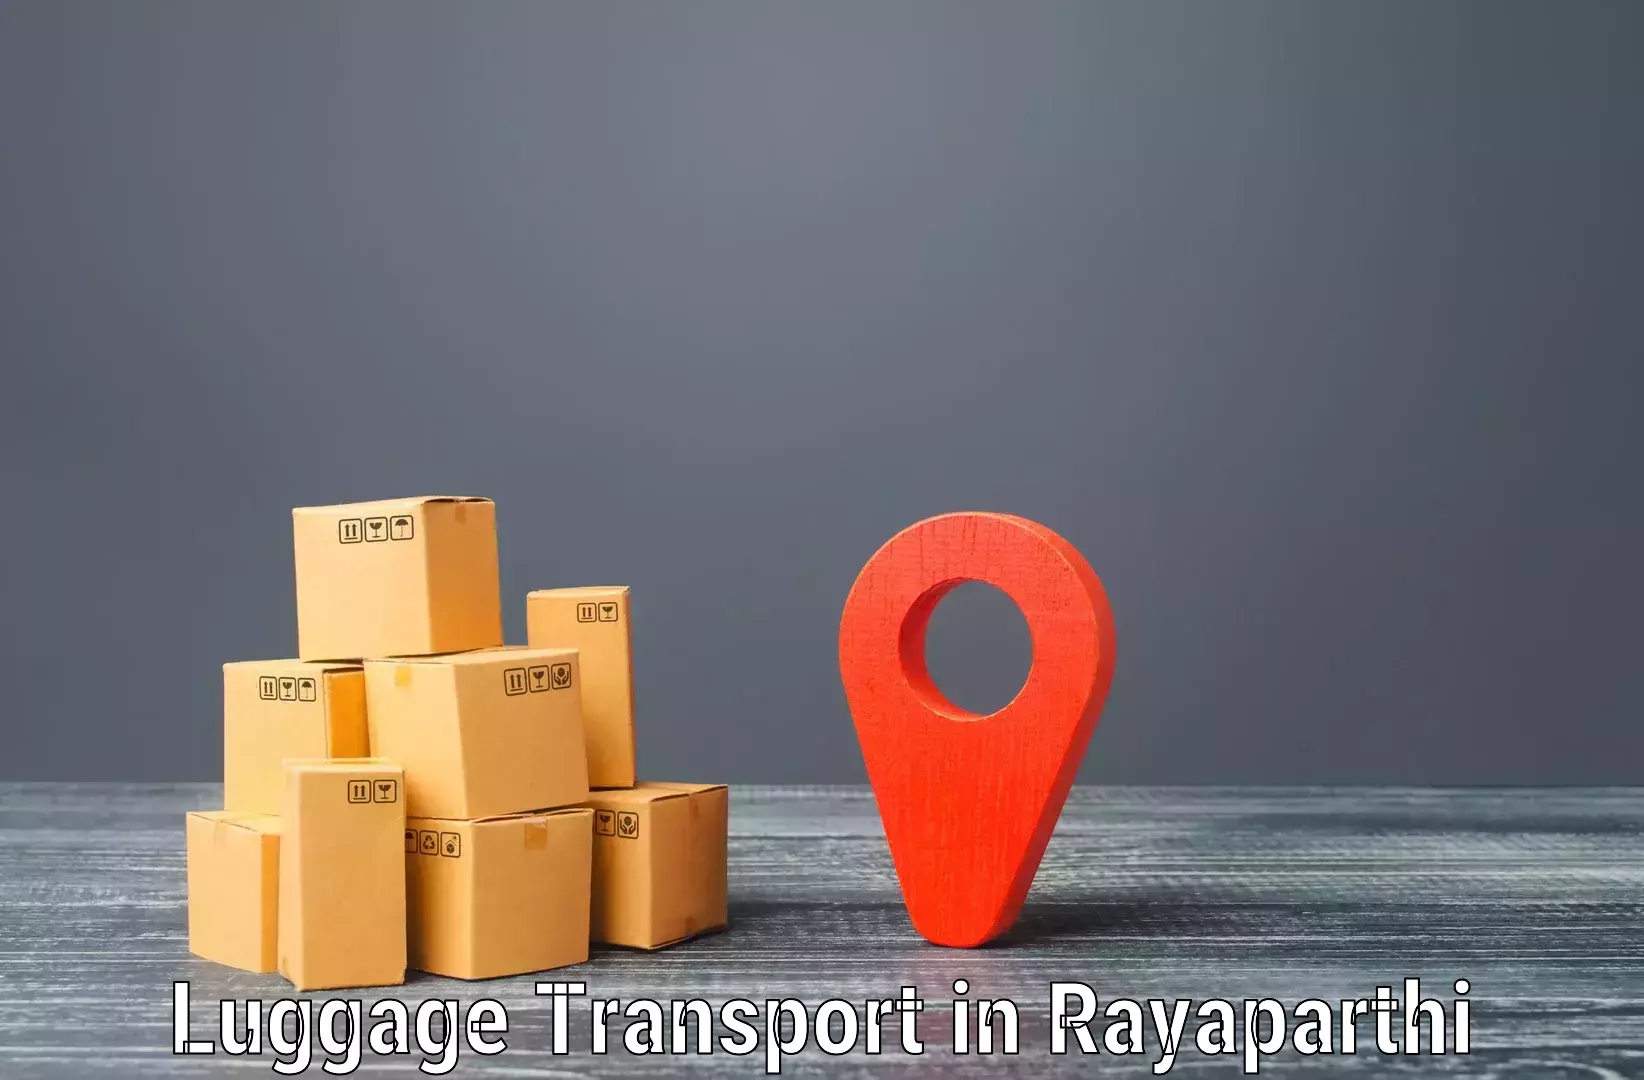 Personal effects shipping in Rayaparthi